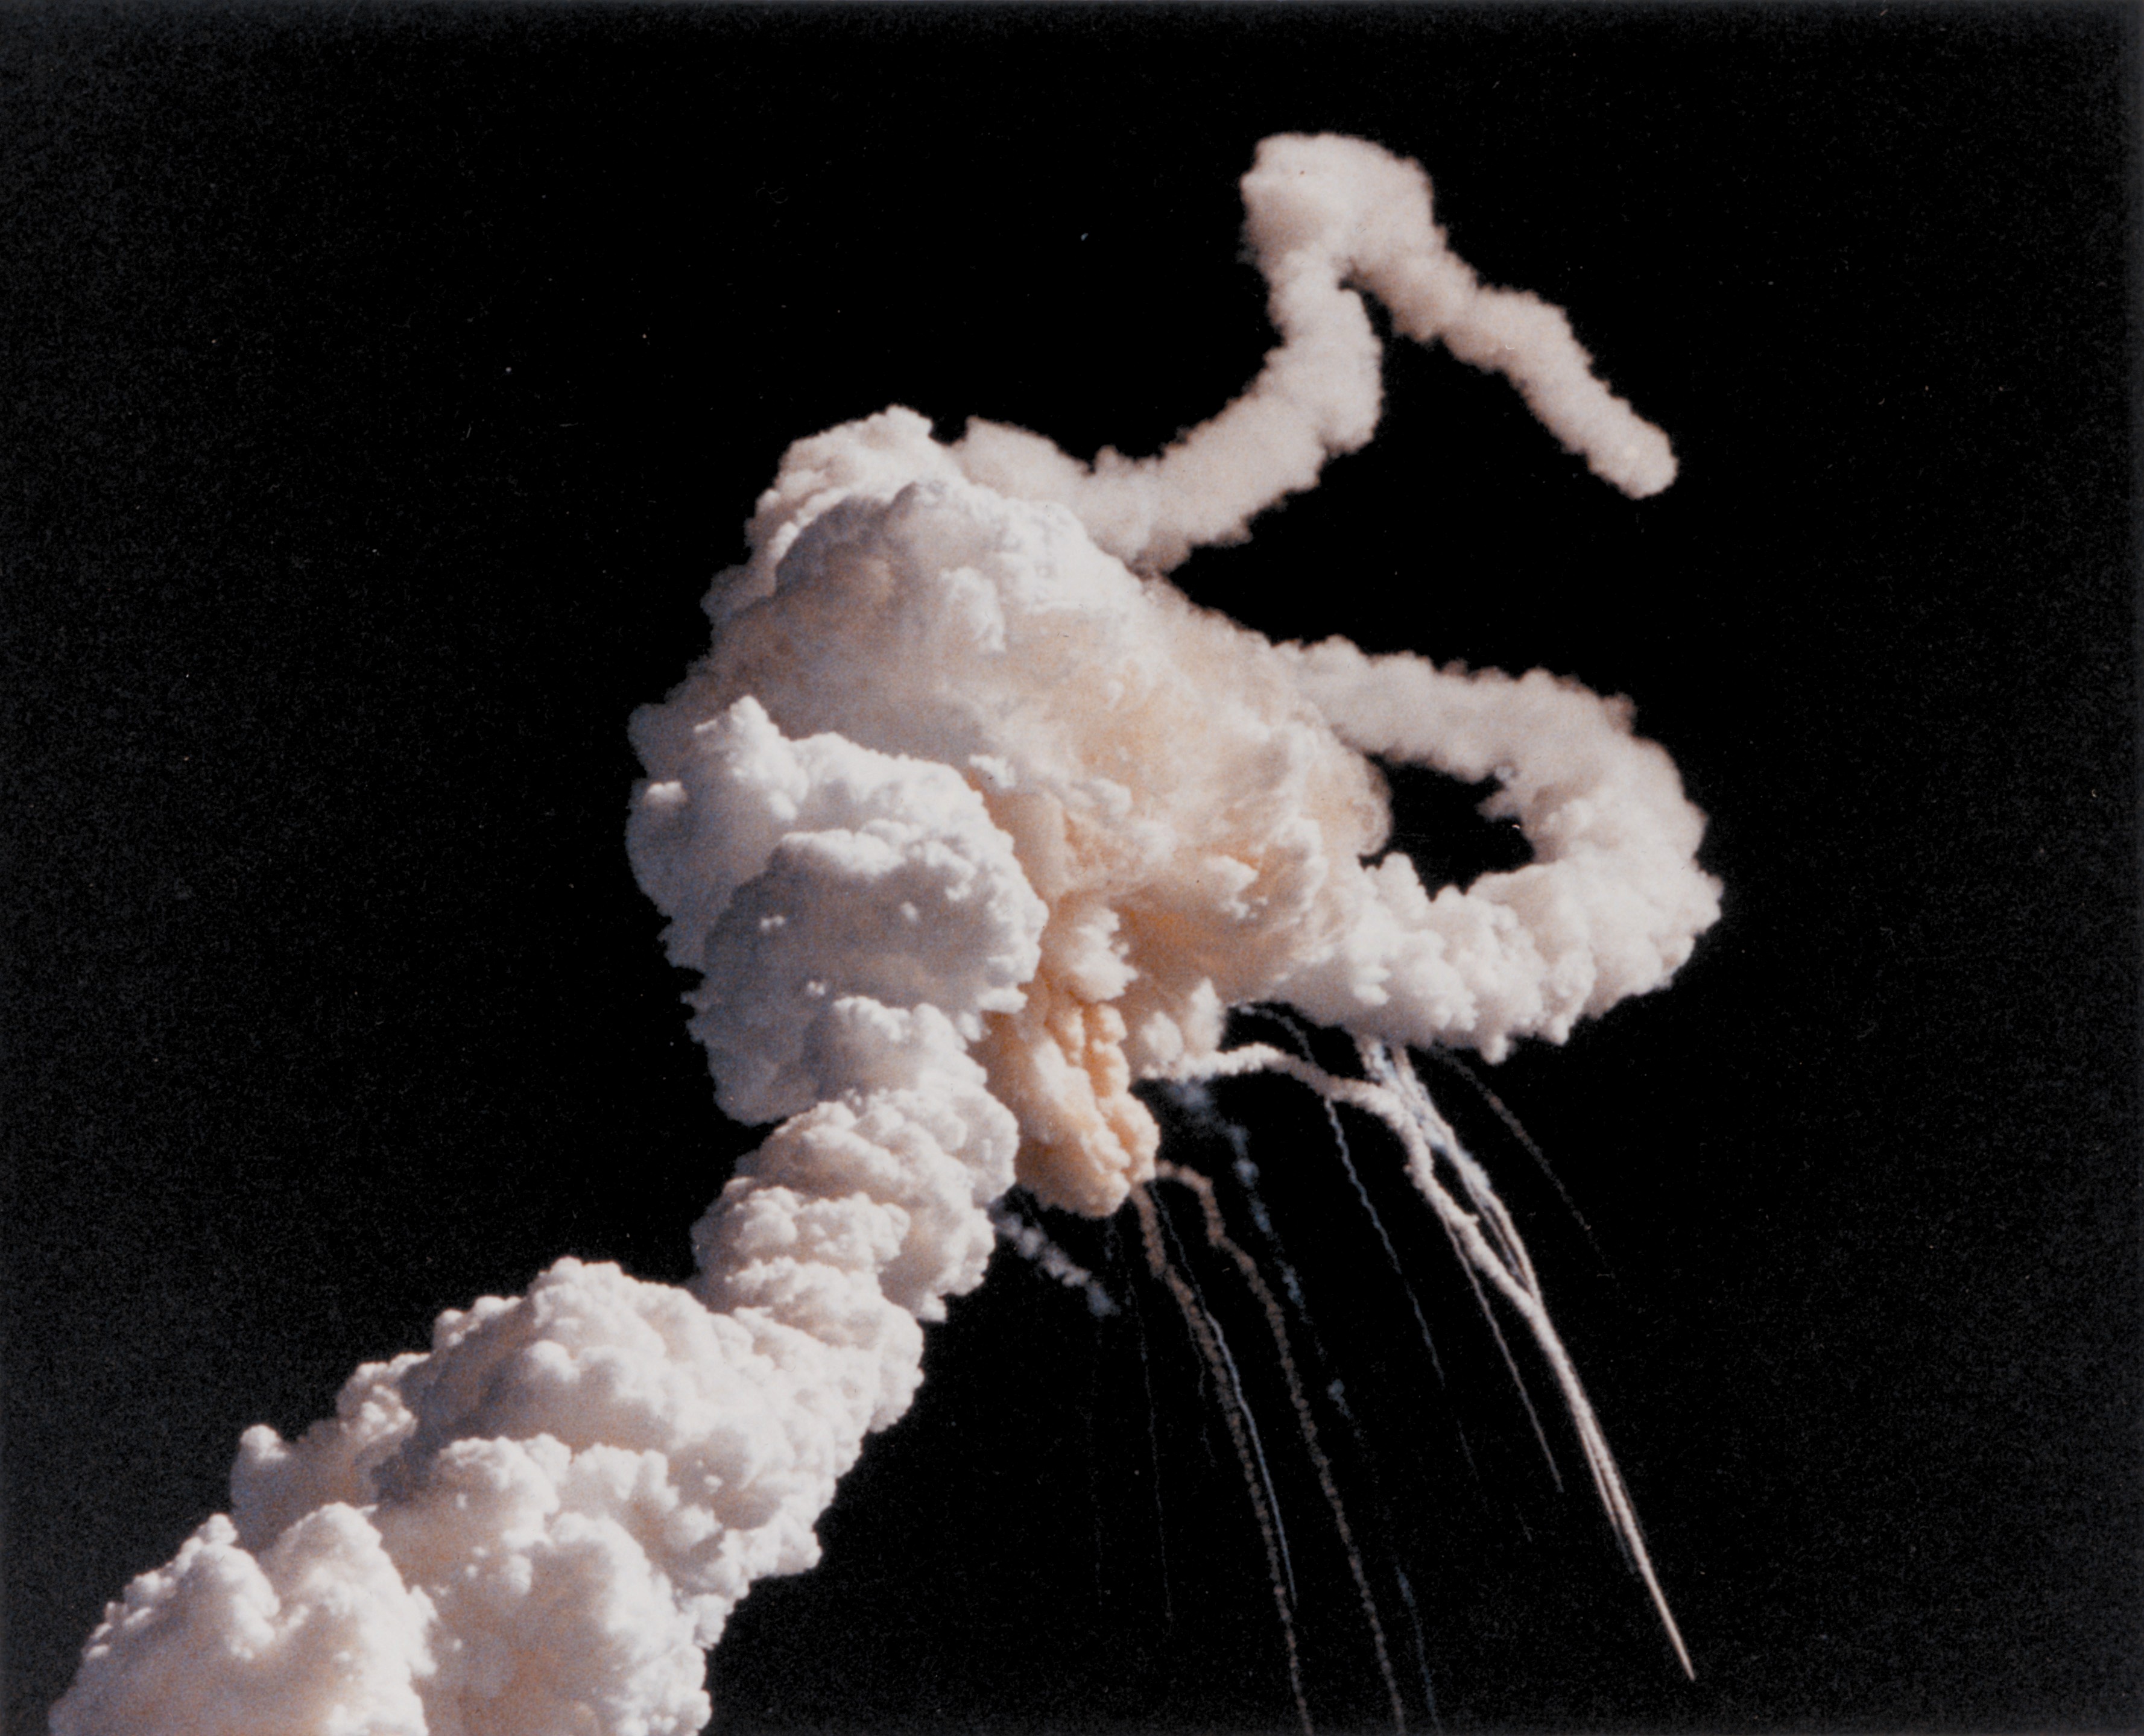 Space Shuttle Challenger disaster - Wikipedia